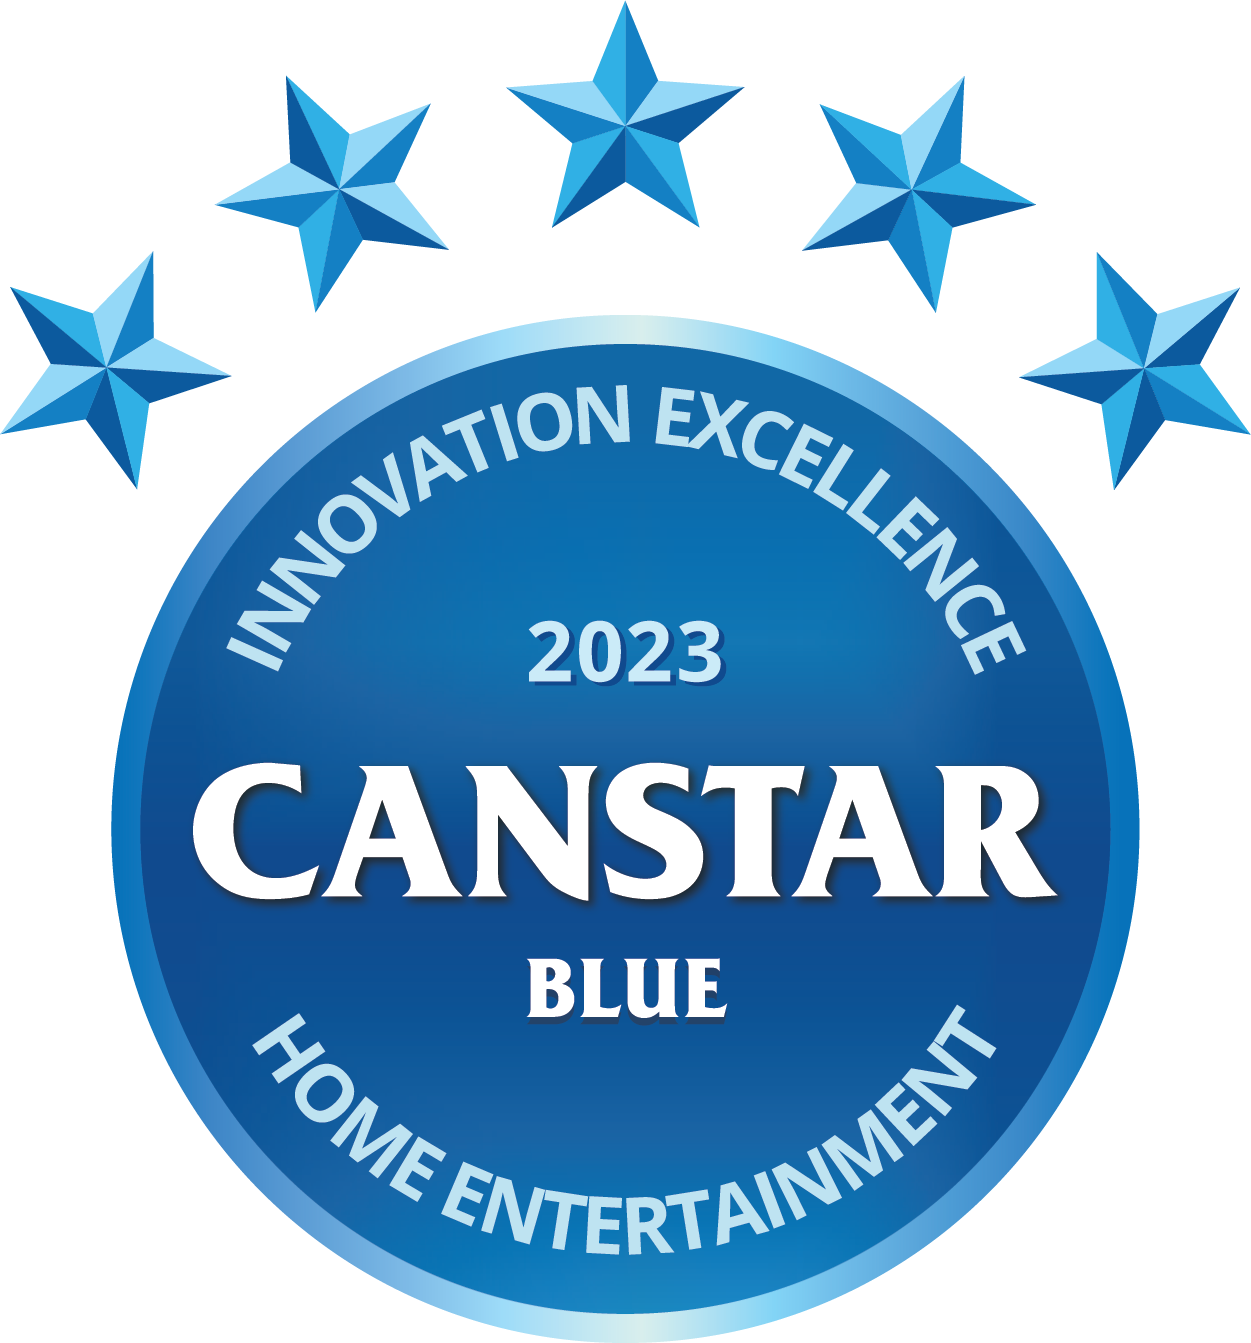 Samsung’s Solar Cell Remote has received Canstar Blue’s Innovation Excellence Award (Home Entertainment) for 2023. This award recognises smart innovations in consumer electronics and is awarded based on Canstar Blue’s sophisticated rating methodology under which winners are scored on a range of factors, including whether the product is unique and how disruptive it is to its product category.